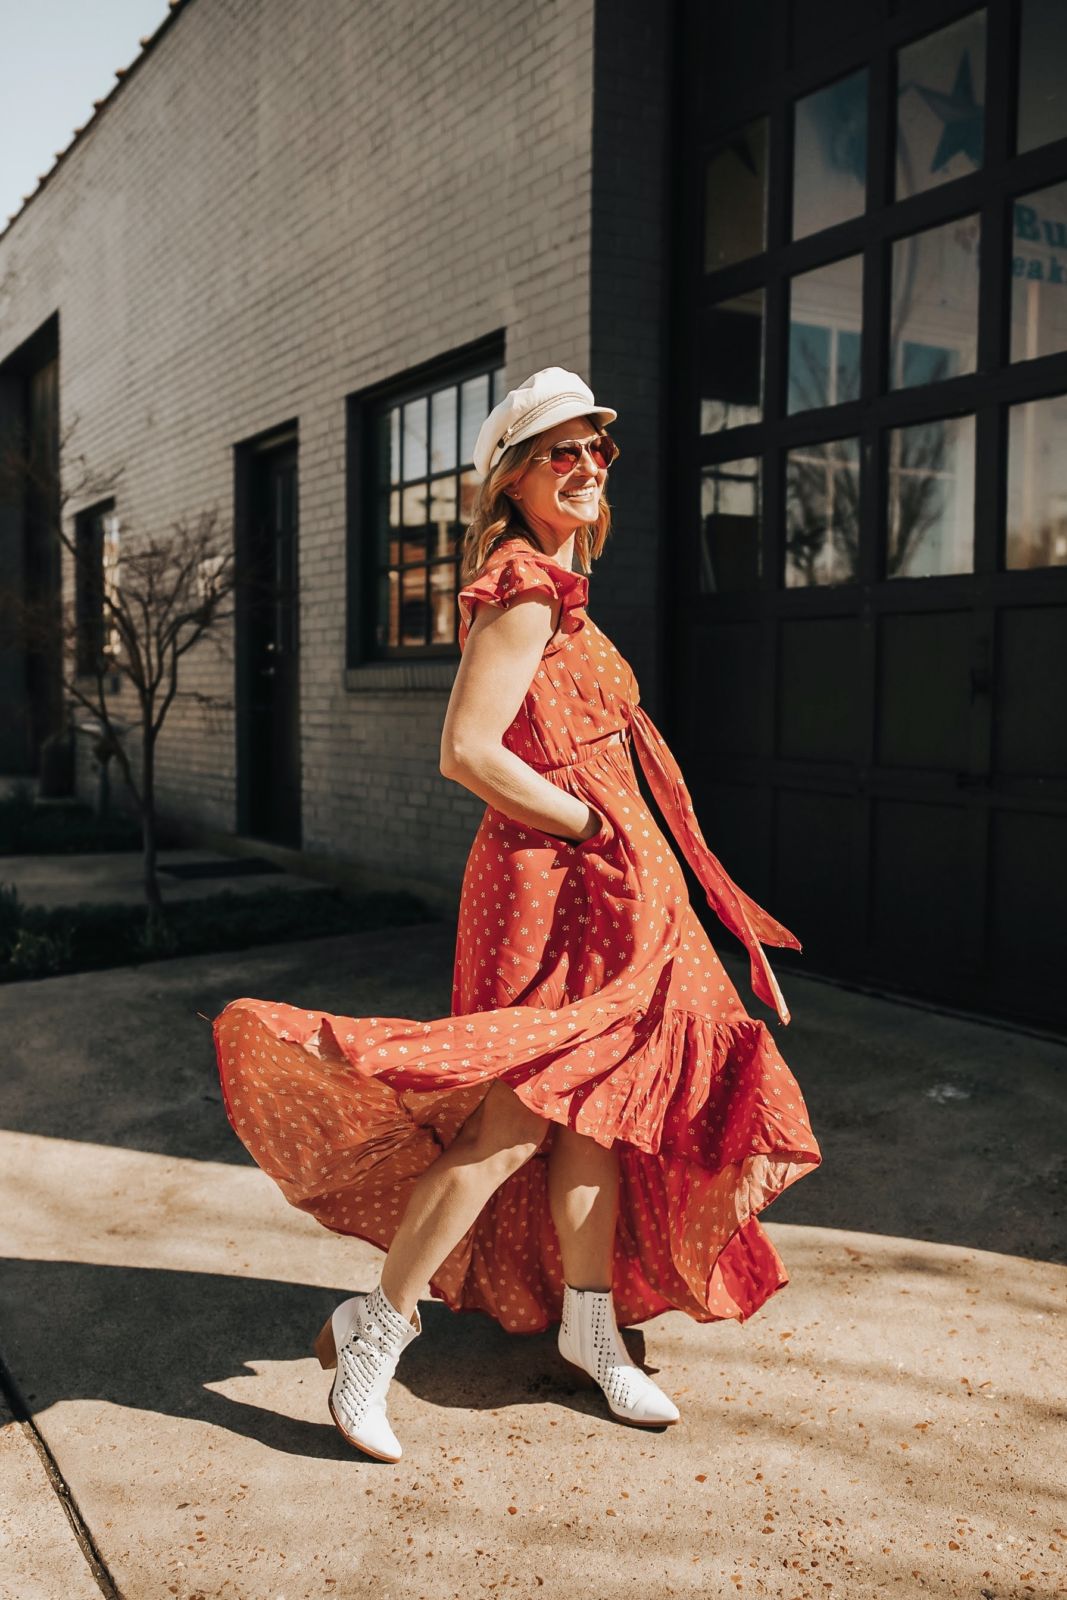 Von Maur - Happy National Dress Day! Celebrate with amazing spring dresses  for under $100. Find your new little number today. 👒👗🐣 Shop Now >>>   #VonMaur #ShoppingPerfected #springisnear  #SpringStyle #SpringFashion #Dres